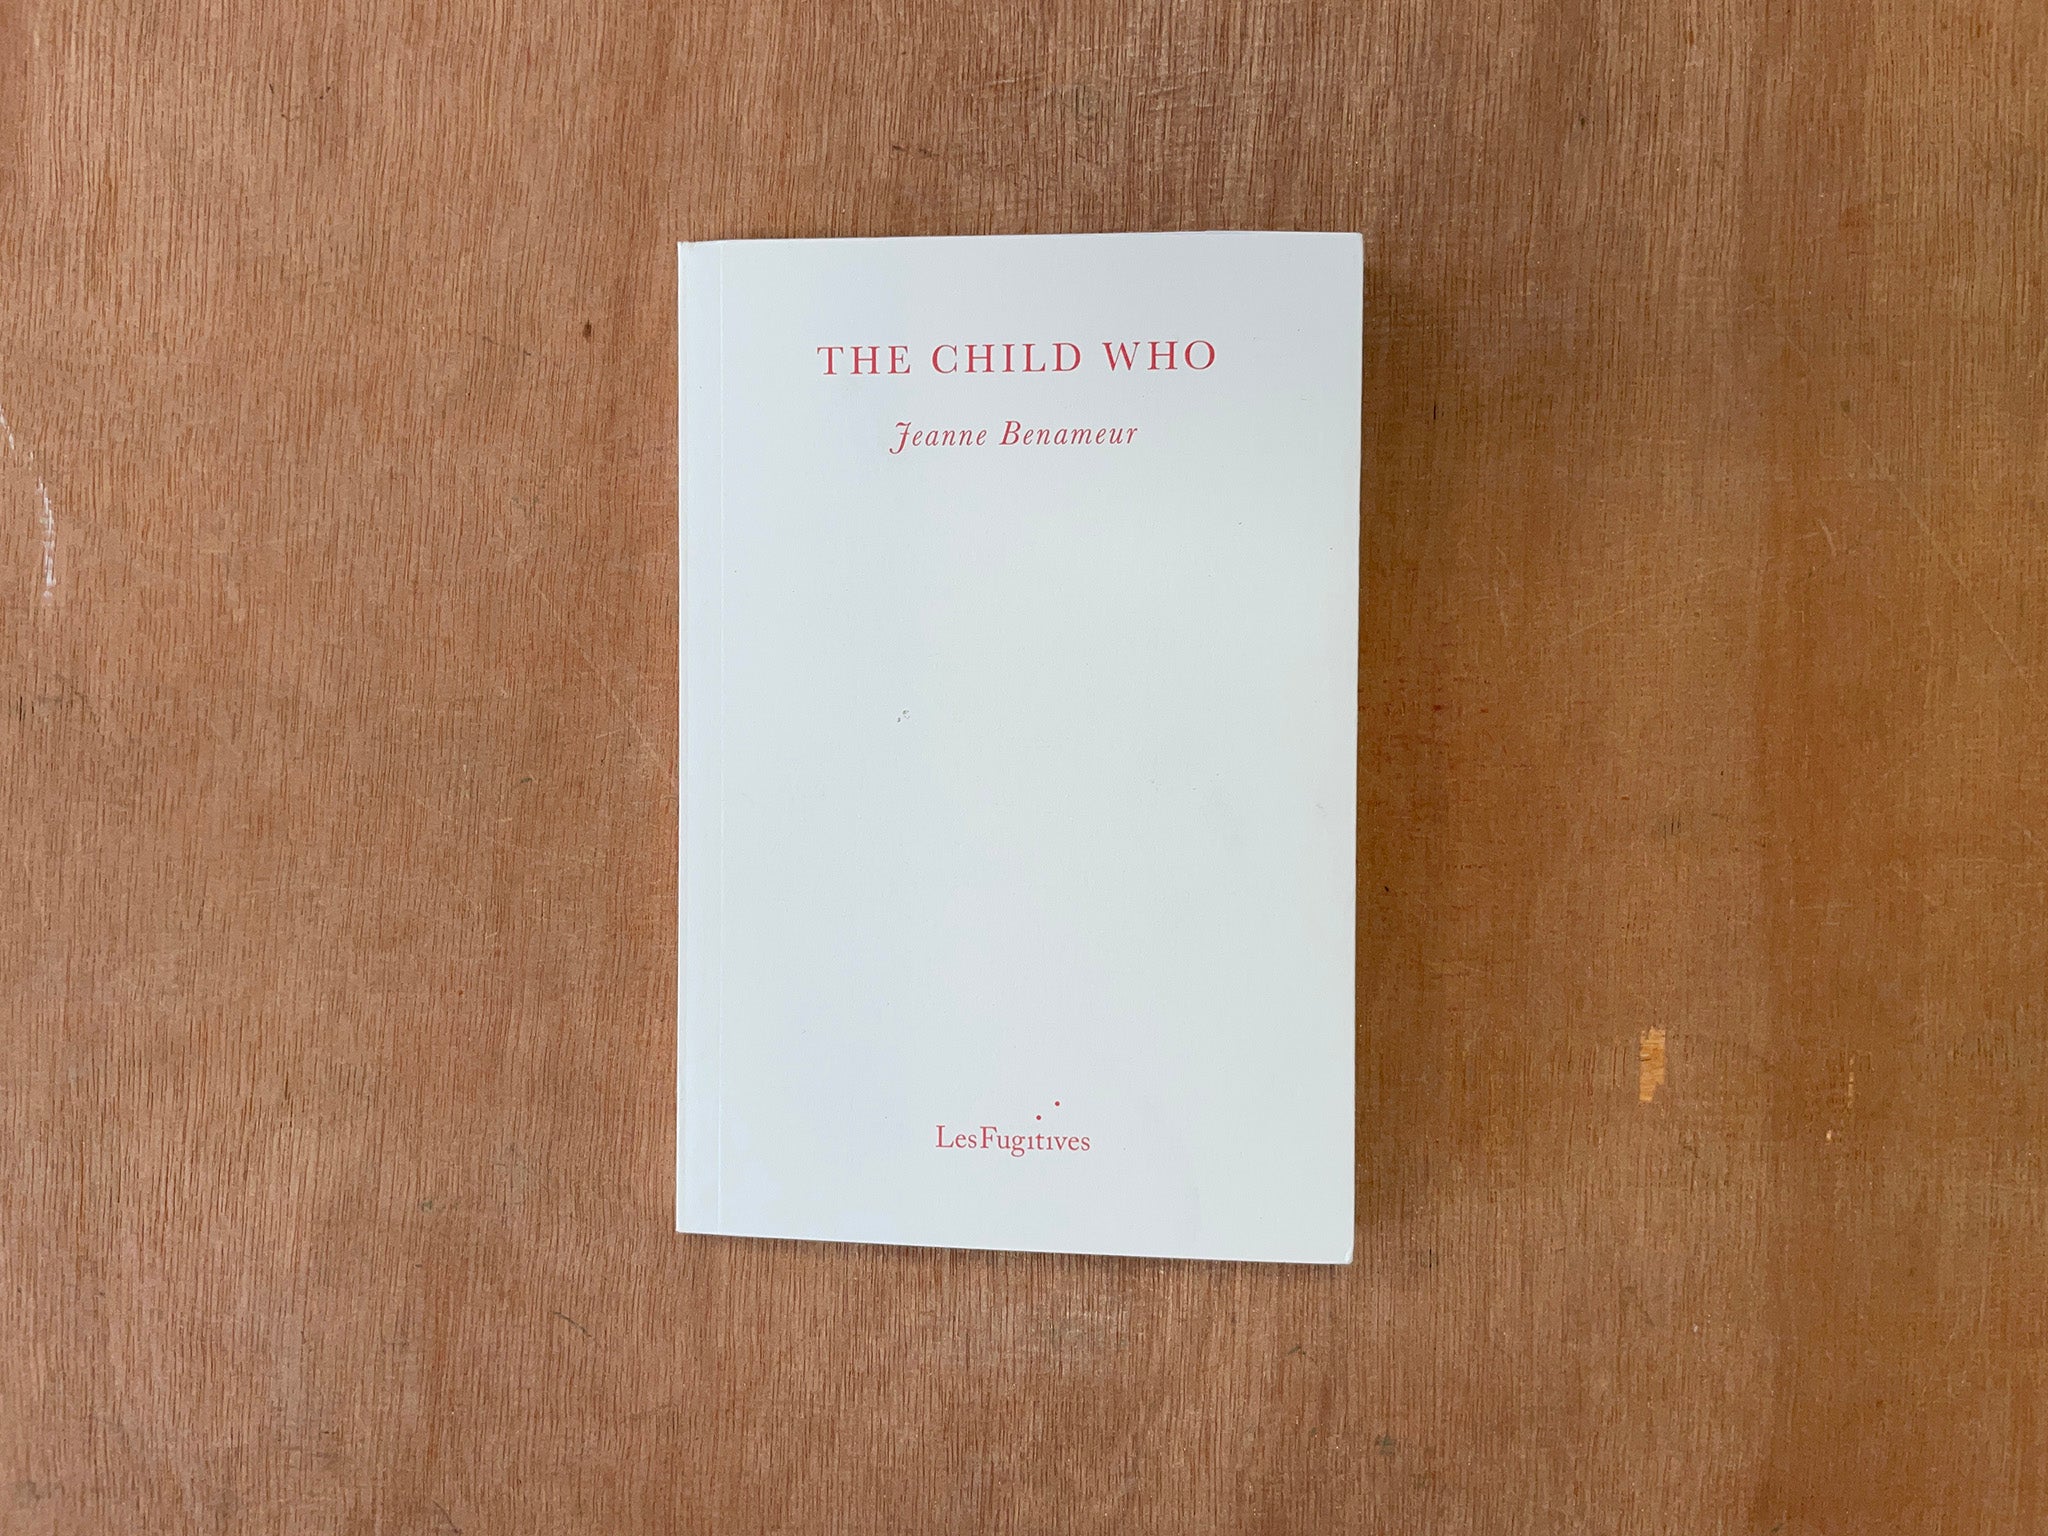 THE CHILD WHO by Jeanne Benameur